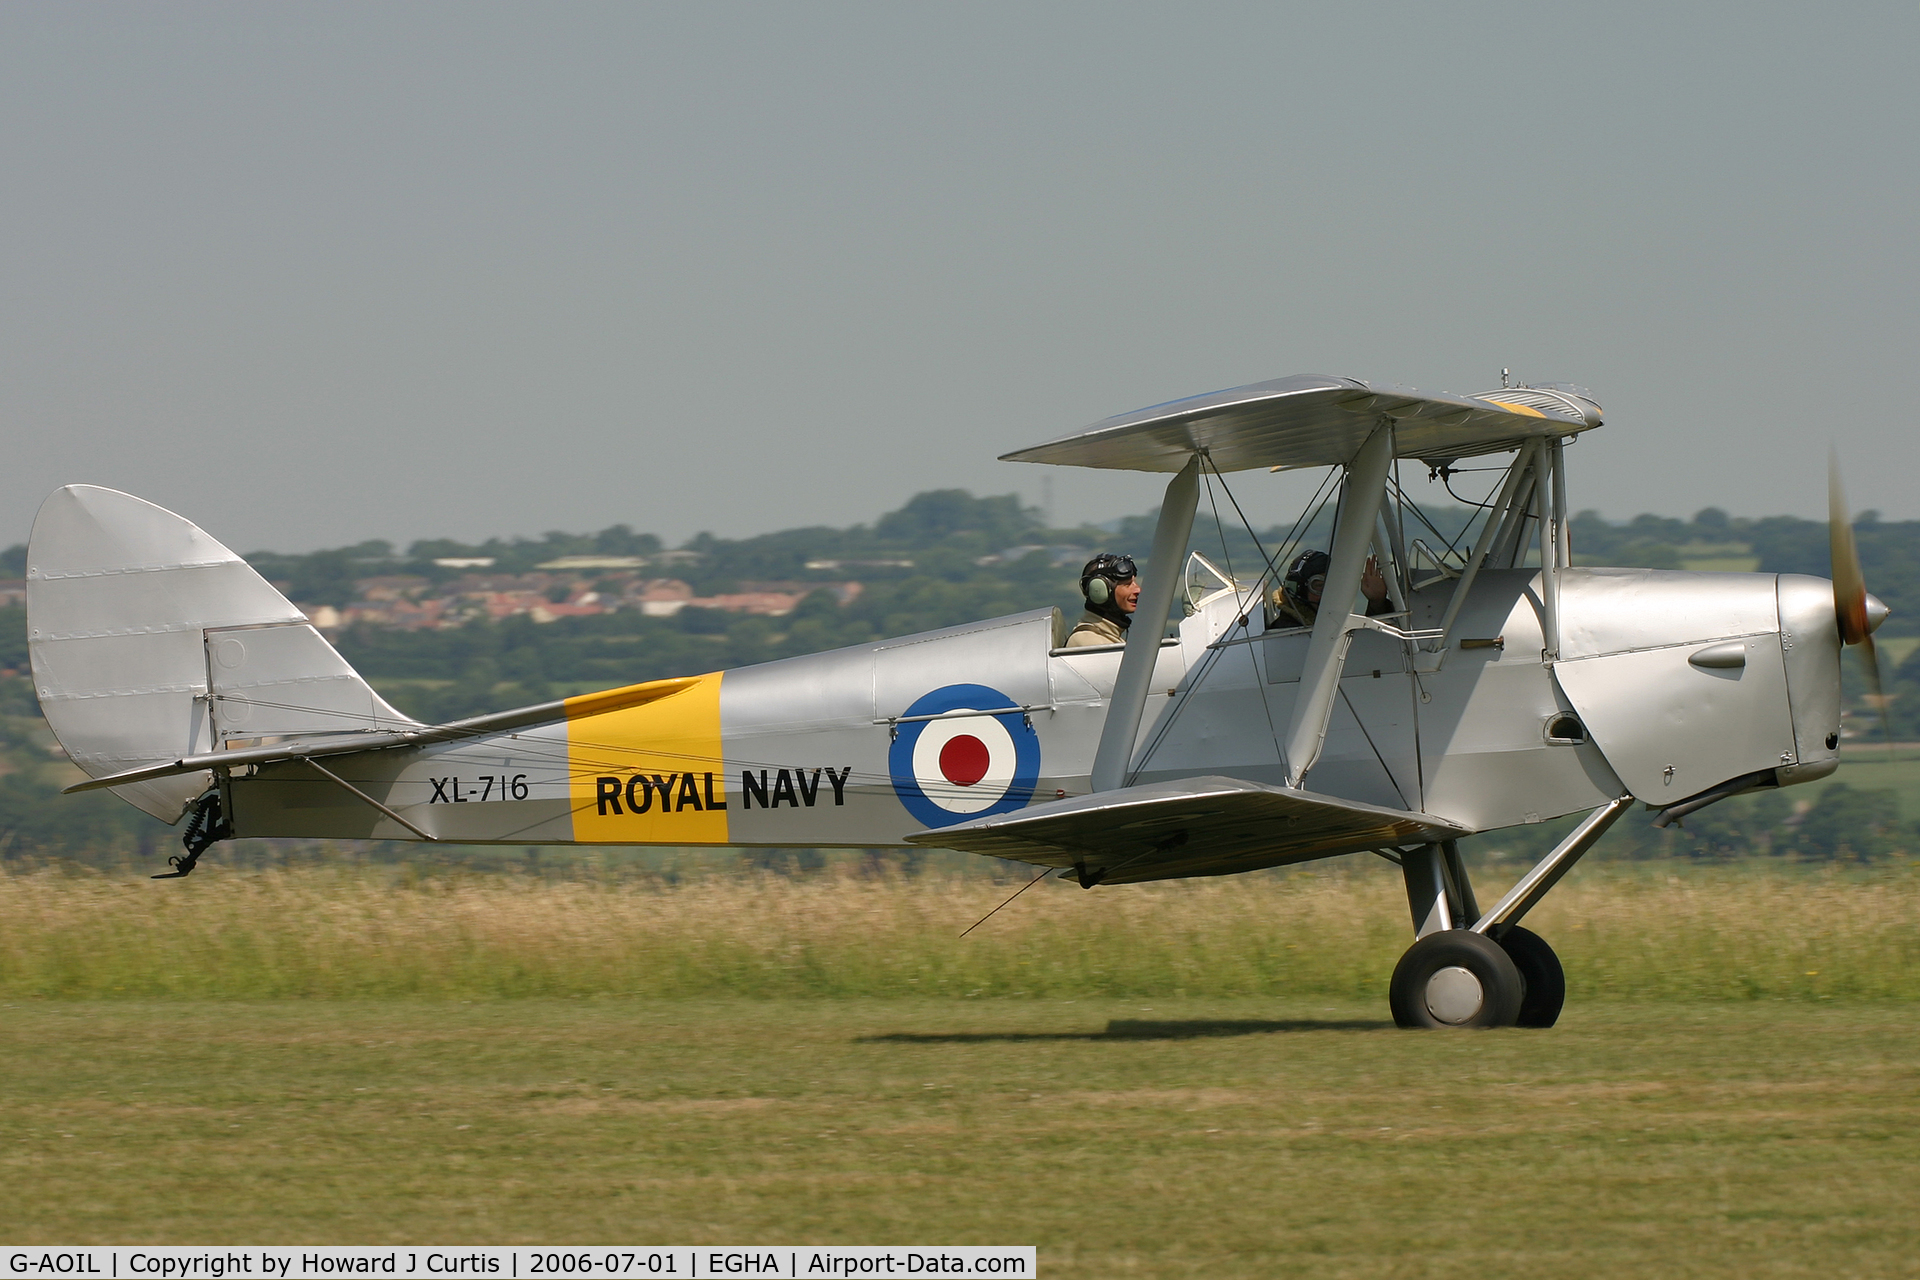 G-AOIL, 1940 De Havilland DH-82A Tiger Moth II C/N 83673, Painted in Royal Navy colours as 'XL-716'. Sadly written off on 15th May 2011.